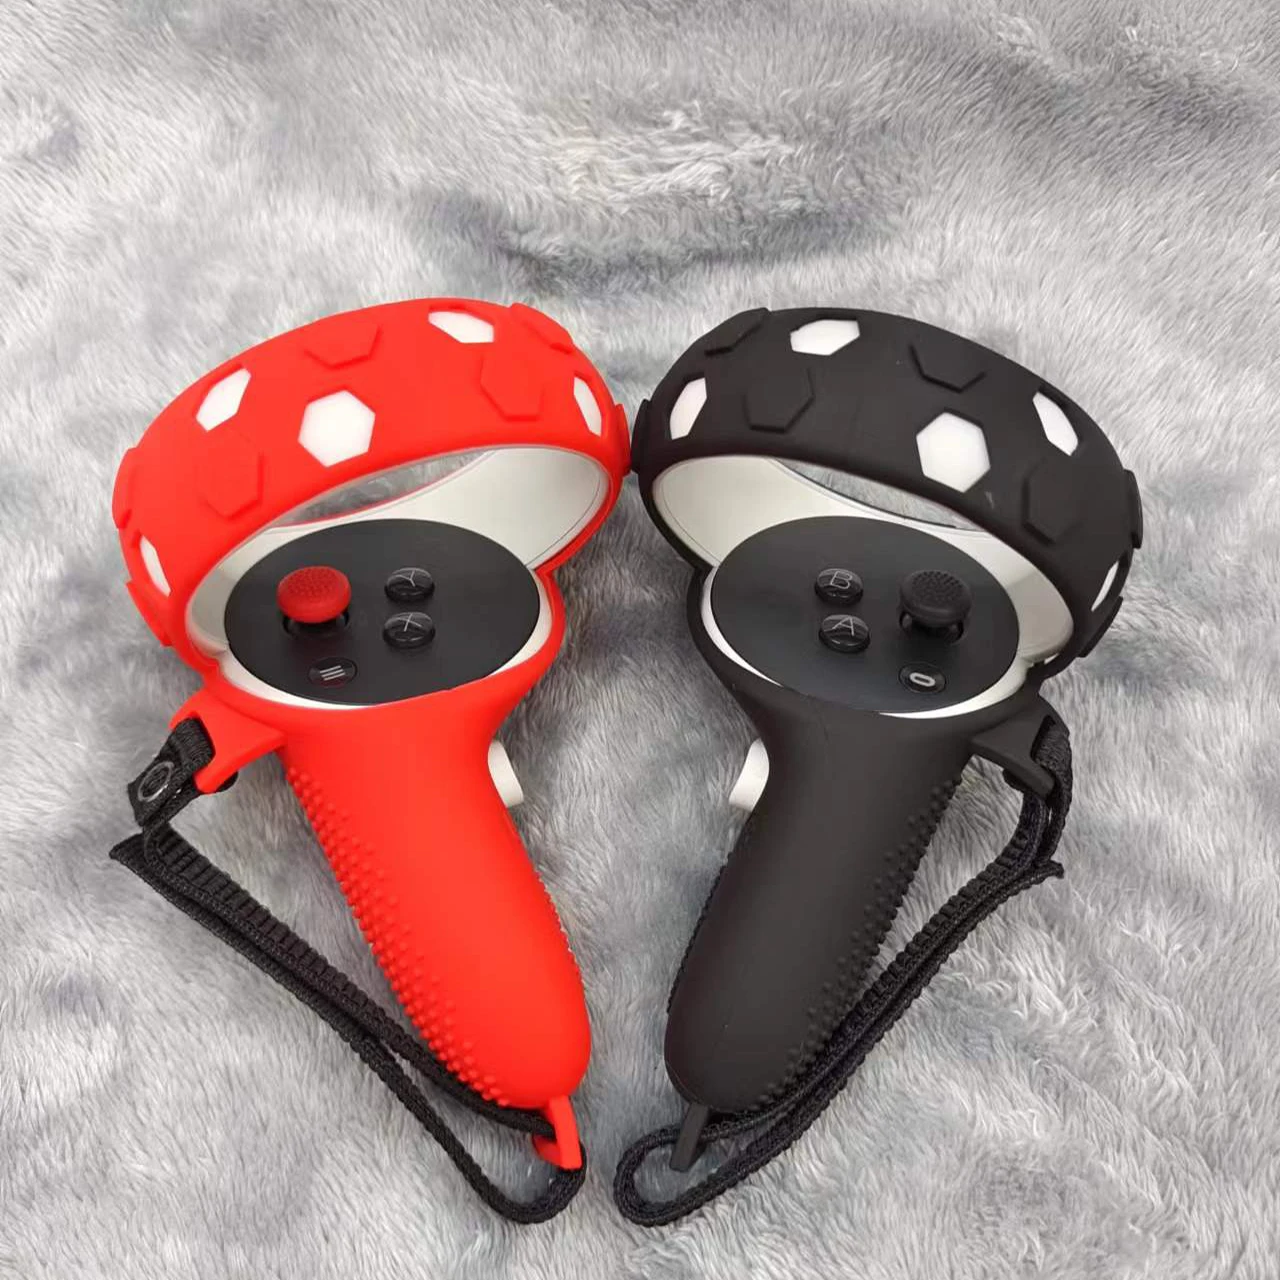 

Touch Controller Silicone Grip Ring Cover+Thumb Caps for Oculus Quest 2 VR Protective Accessories Black Red